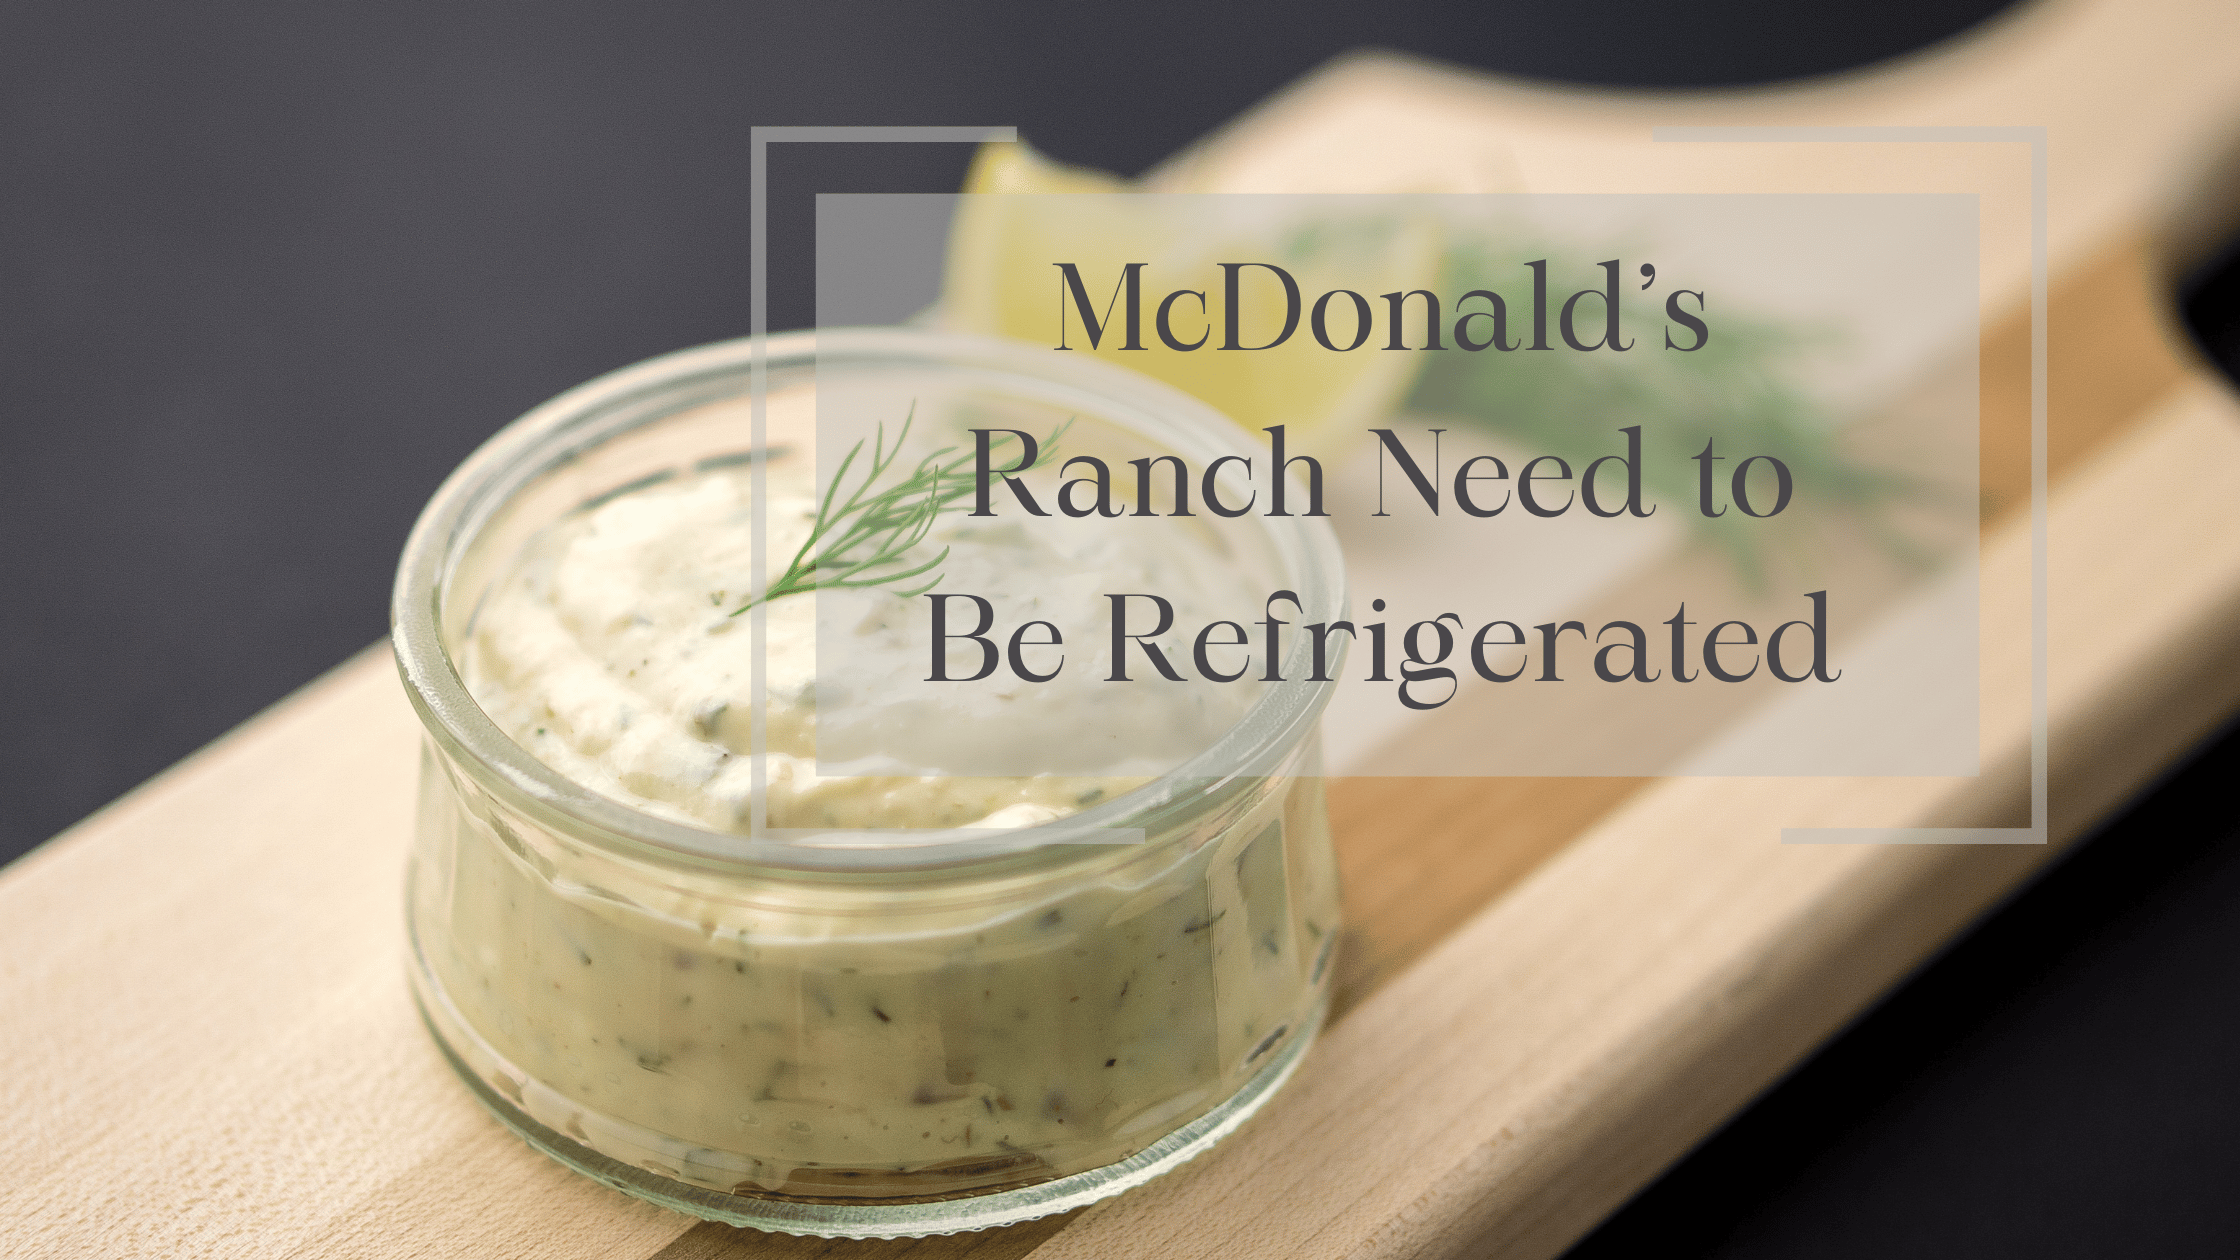 McDonald’s Ranch Need to Be Refrigerated